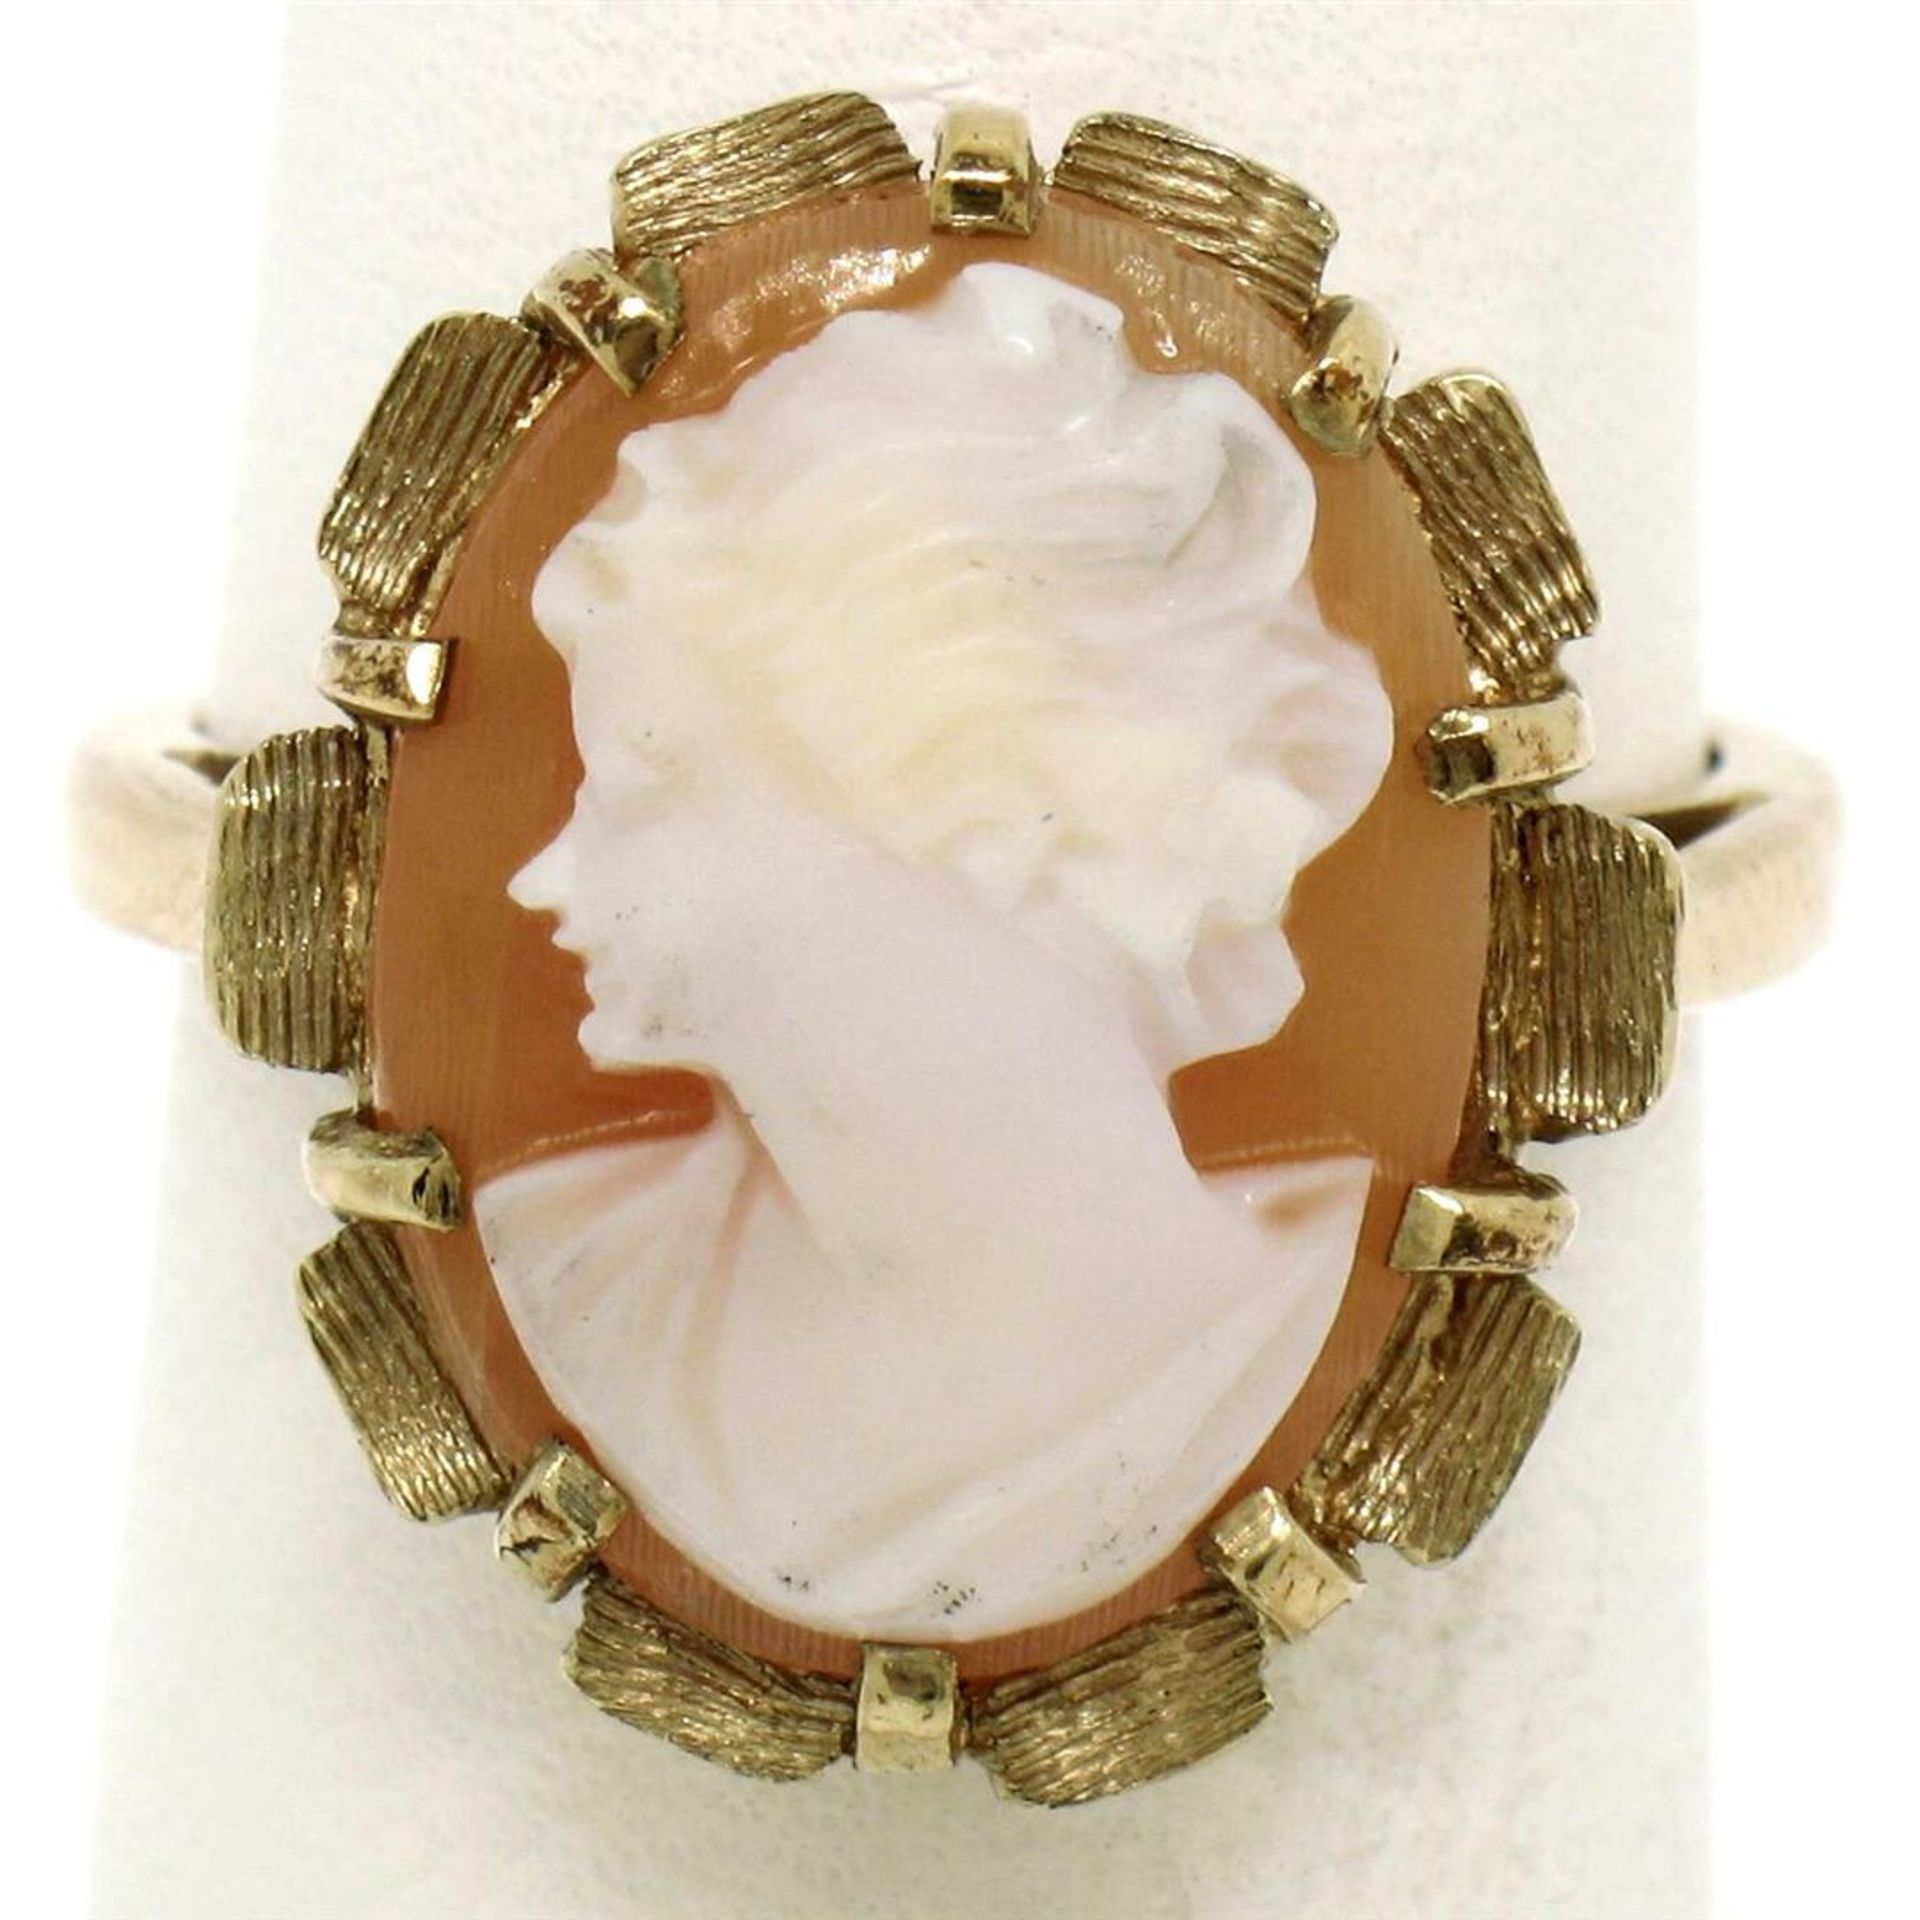 Vintage 14k Yellow Gold Oval Carved Shell Cameo Ring w/ Brushed Finish Frame - Image 3 of 8